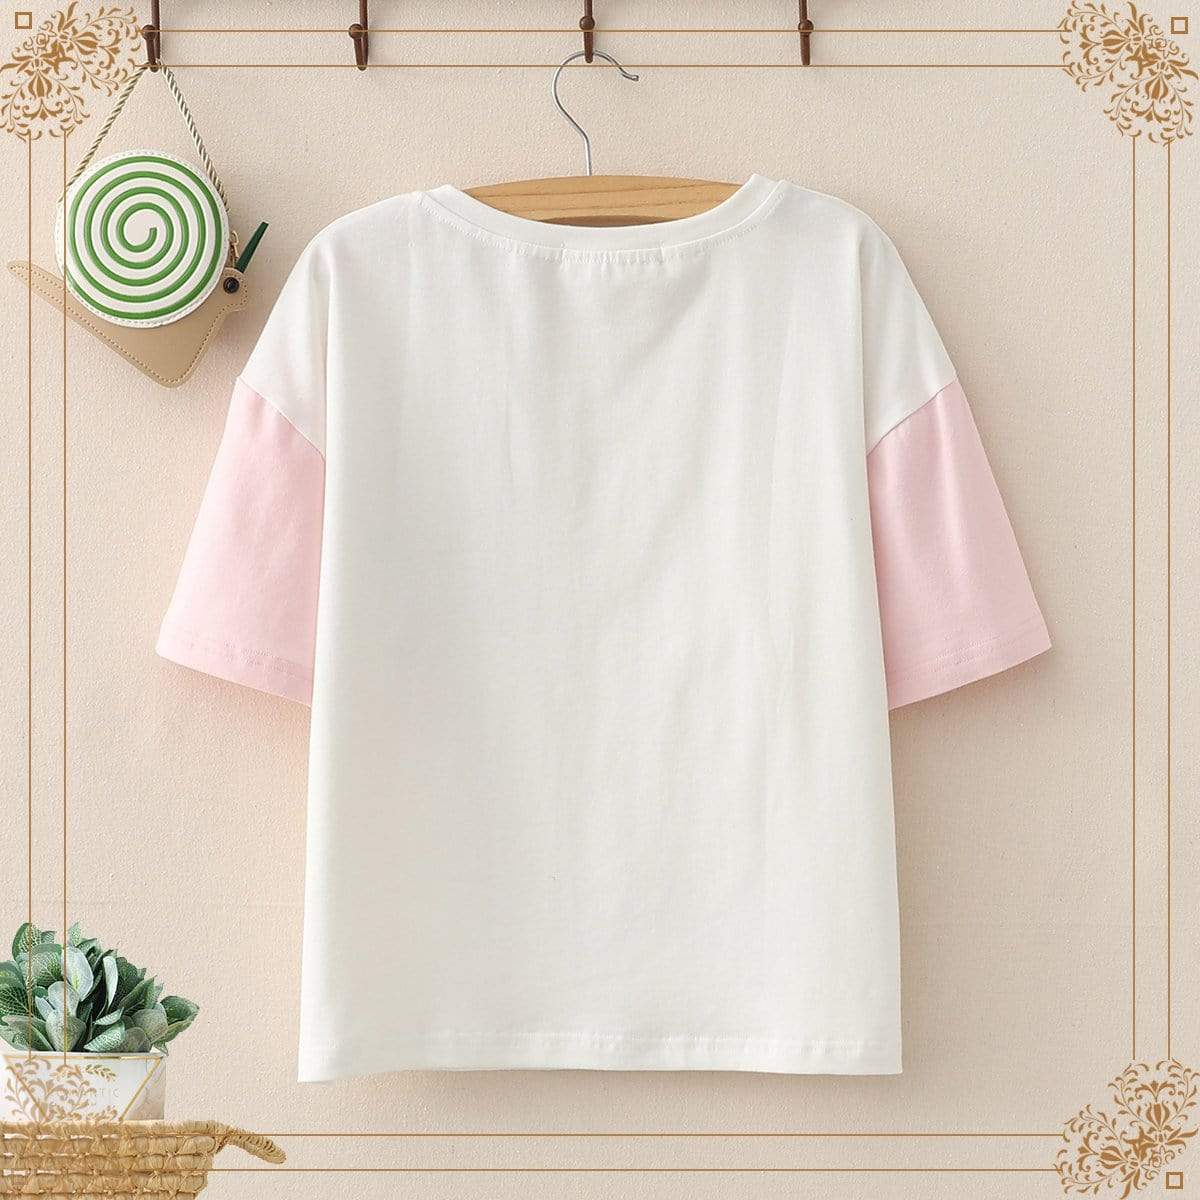 Kawaiifashion Women's Lovely Pig Printed Contrast Color Sleeved Tees